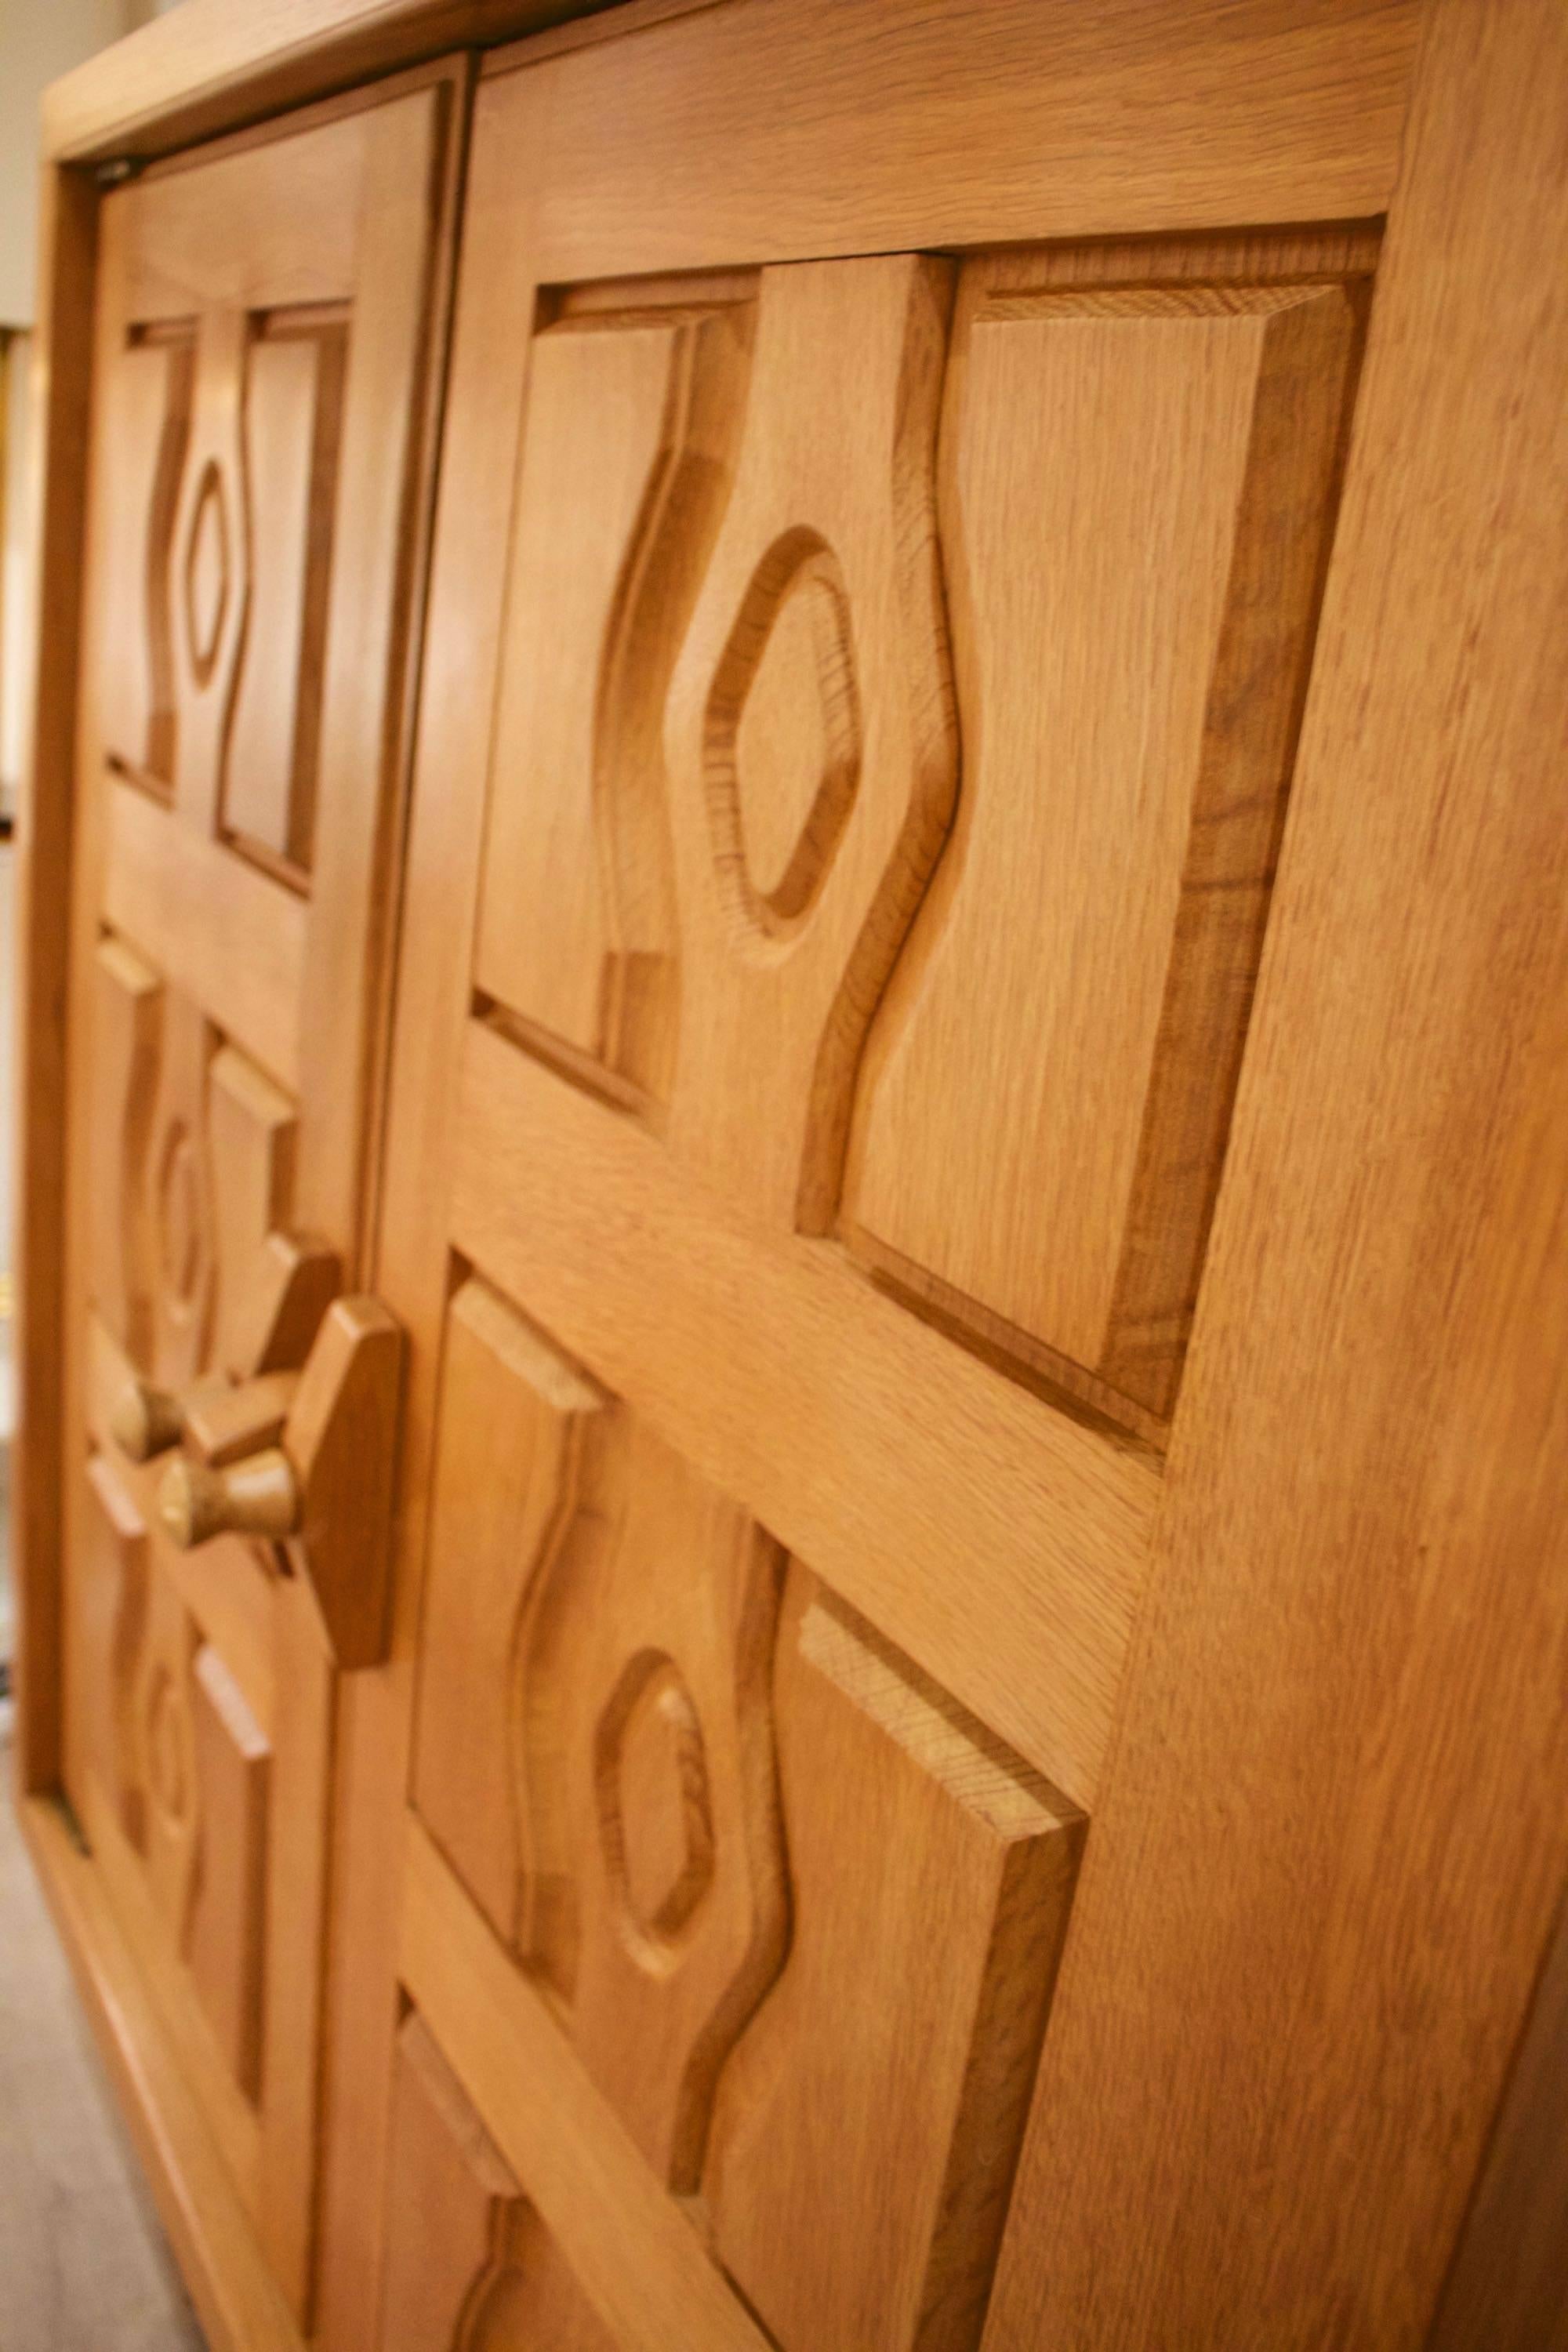 The cabinet is in solid oak, it rests on 4 square section legs connected by a spacer.
Two opening doors adorned with geometric patterns and beautifully crafted door handles, typical of Guillerme and Chambron creations.
It opens onto a large storage